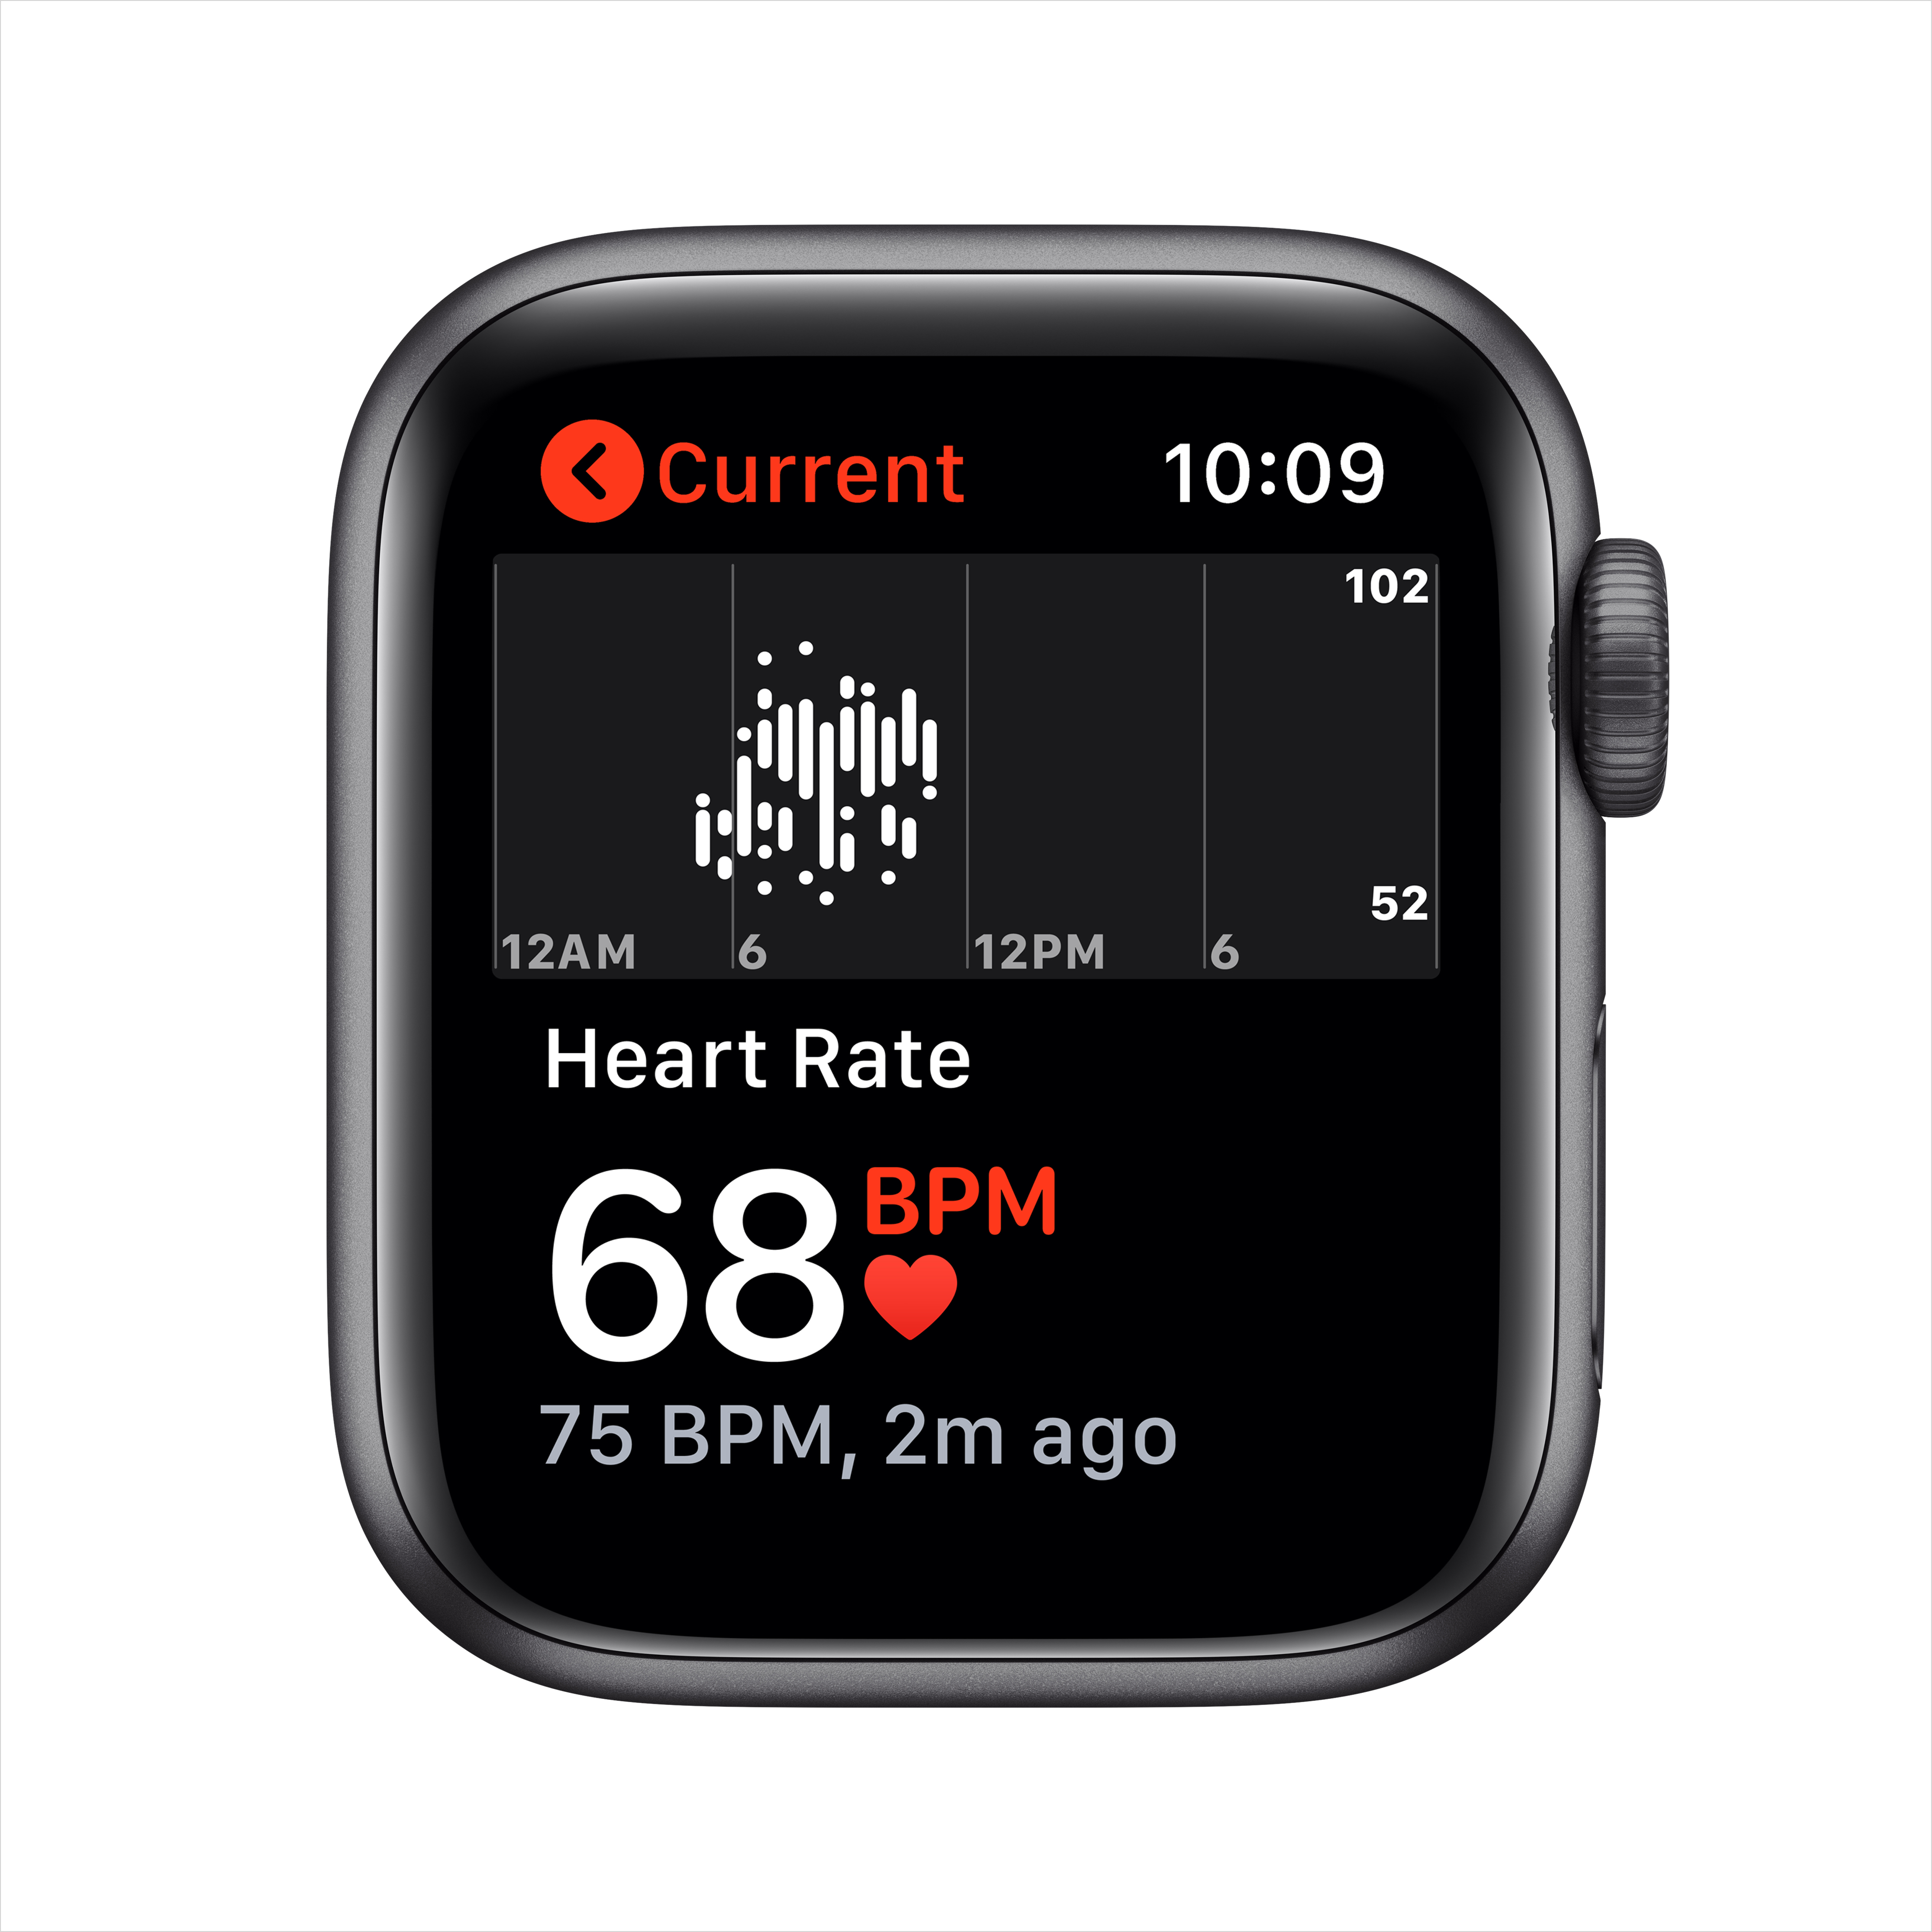 Apple Watch SE (1st Gen) GPS, 40mm Space Gray Aluminum Case with Black Sport Band - Regular - image 2 of 9